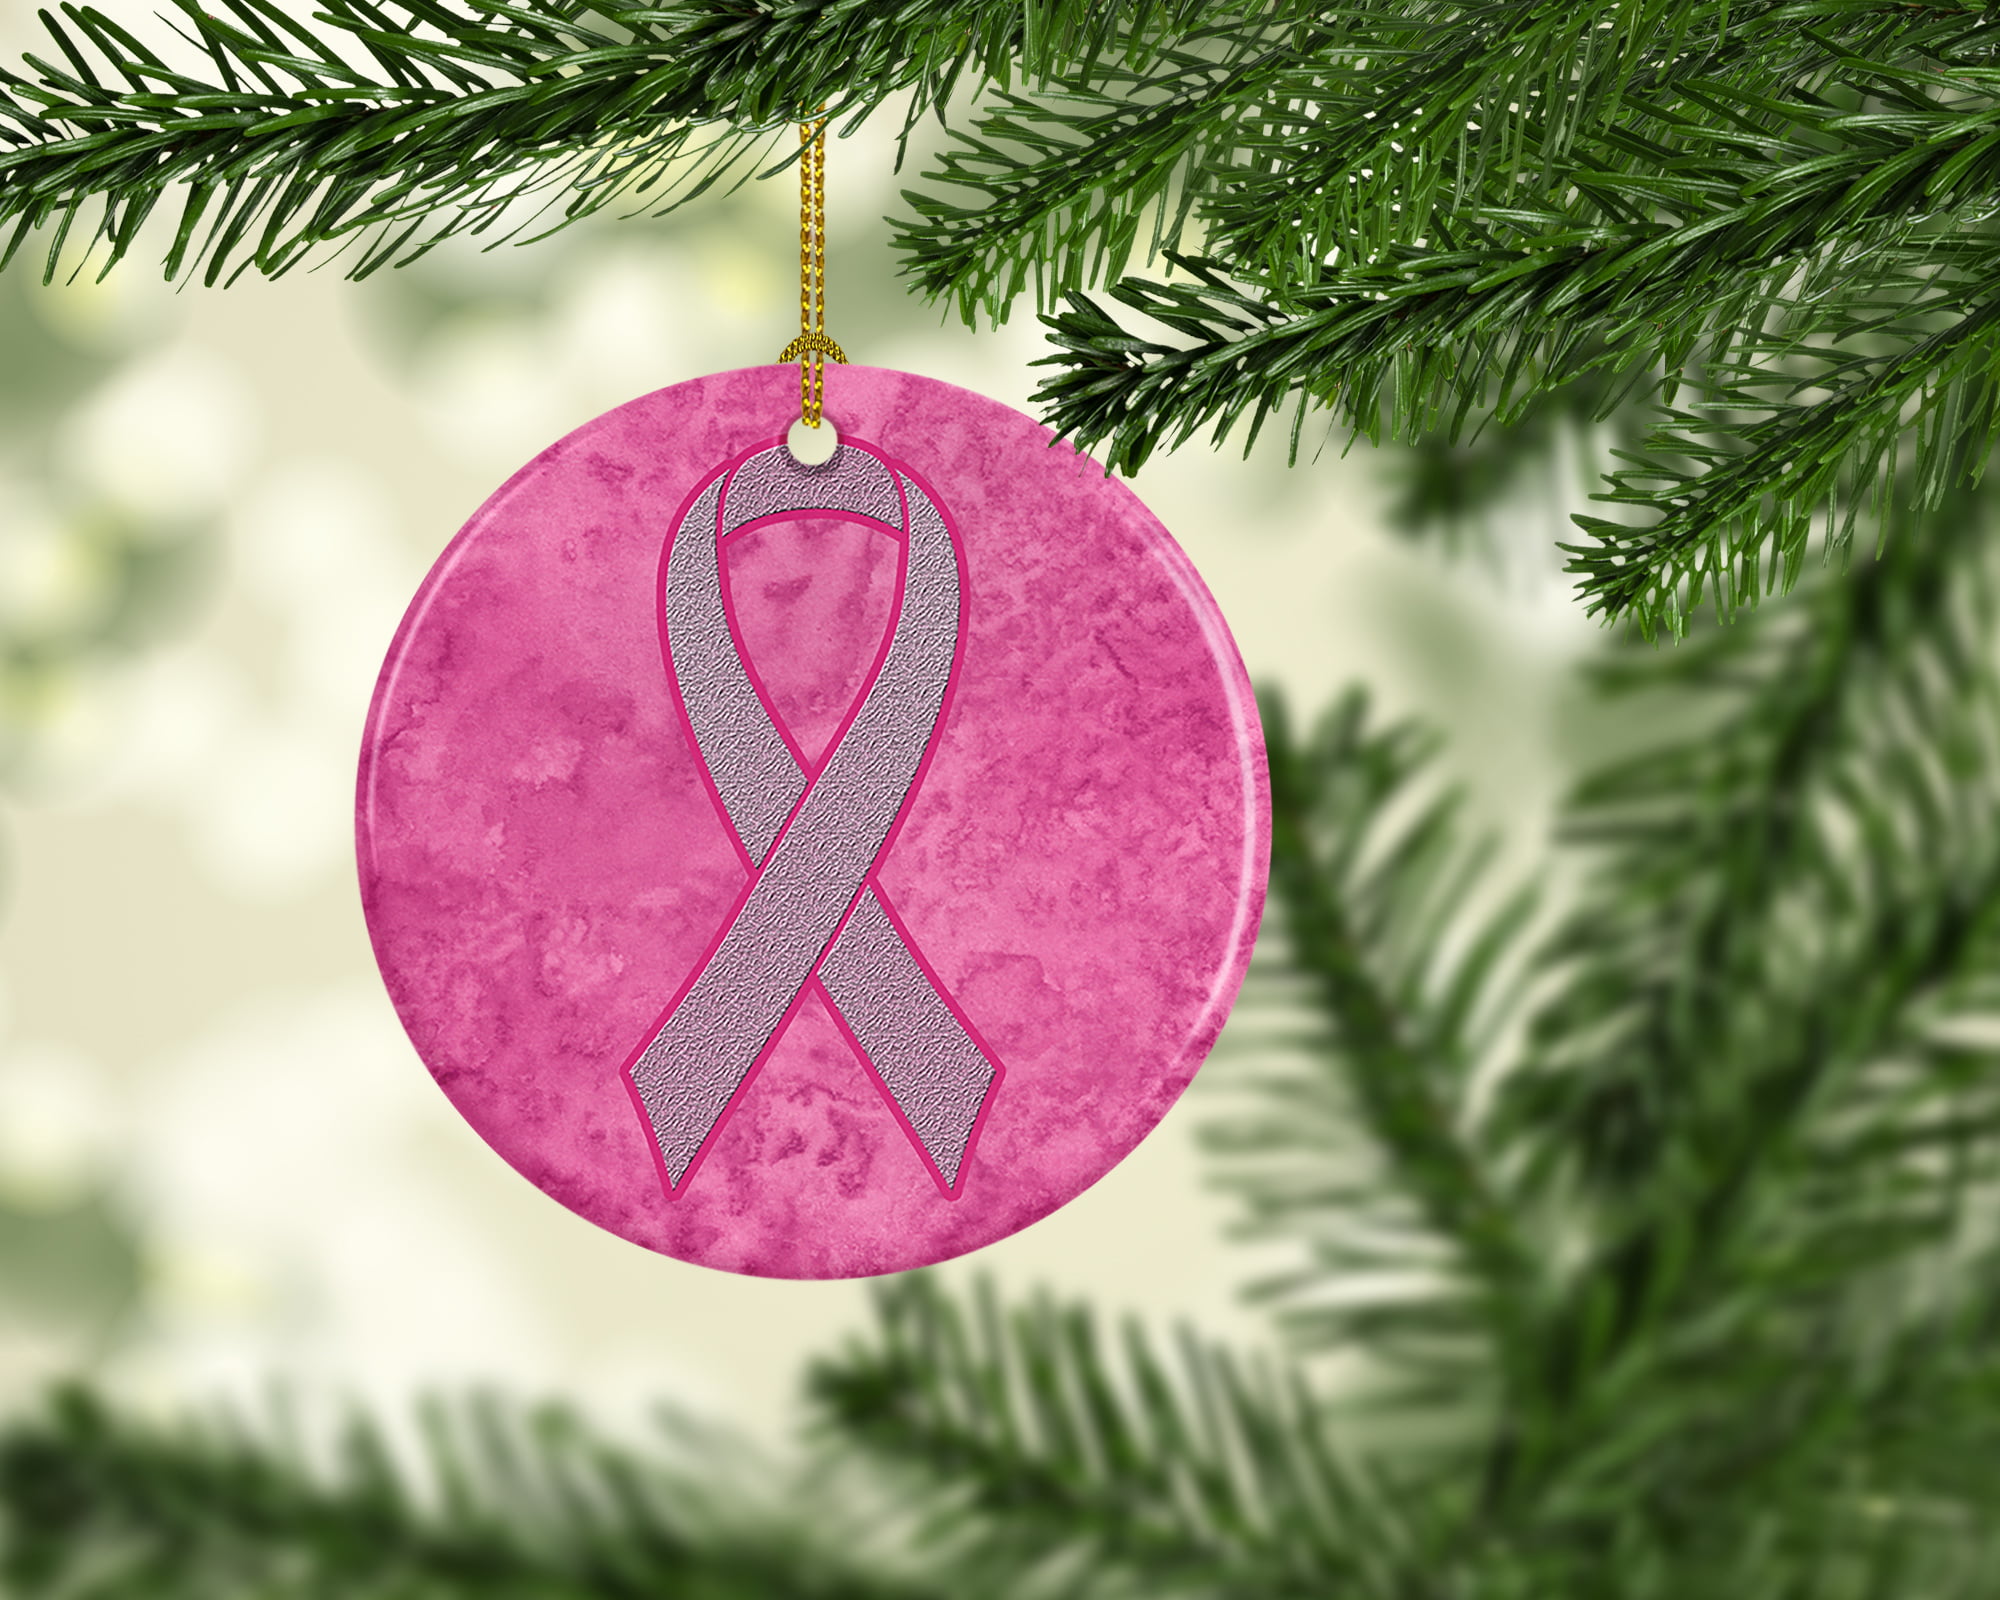 Glitter Christmas Ornament Awareness Ribbon Ornament Breast Cancer Ornament Gifts for Her Gifts for Mom Pink Ribbon Pink Power